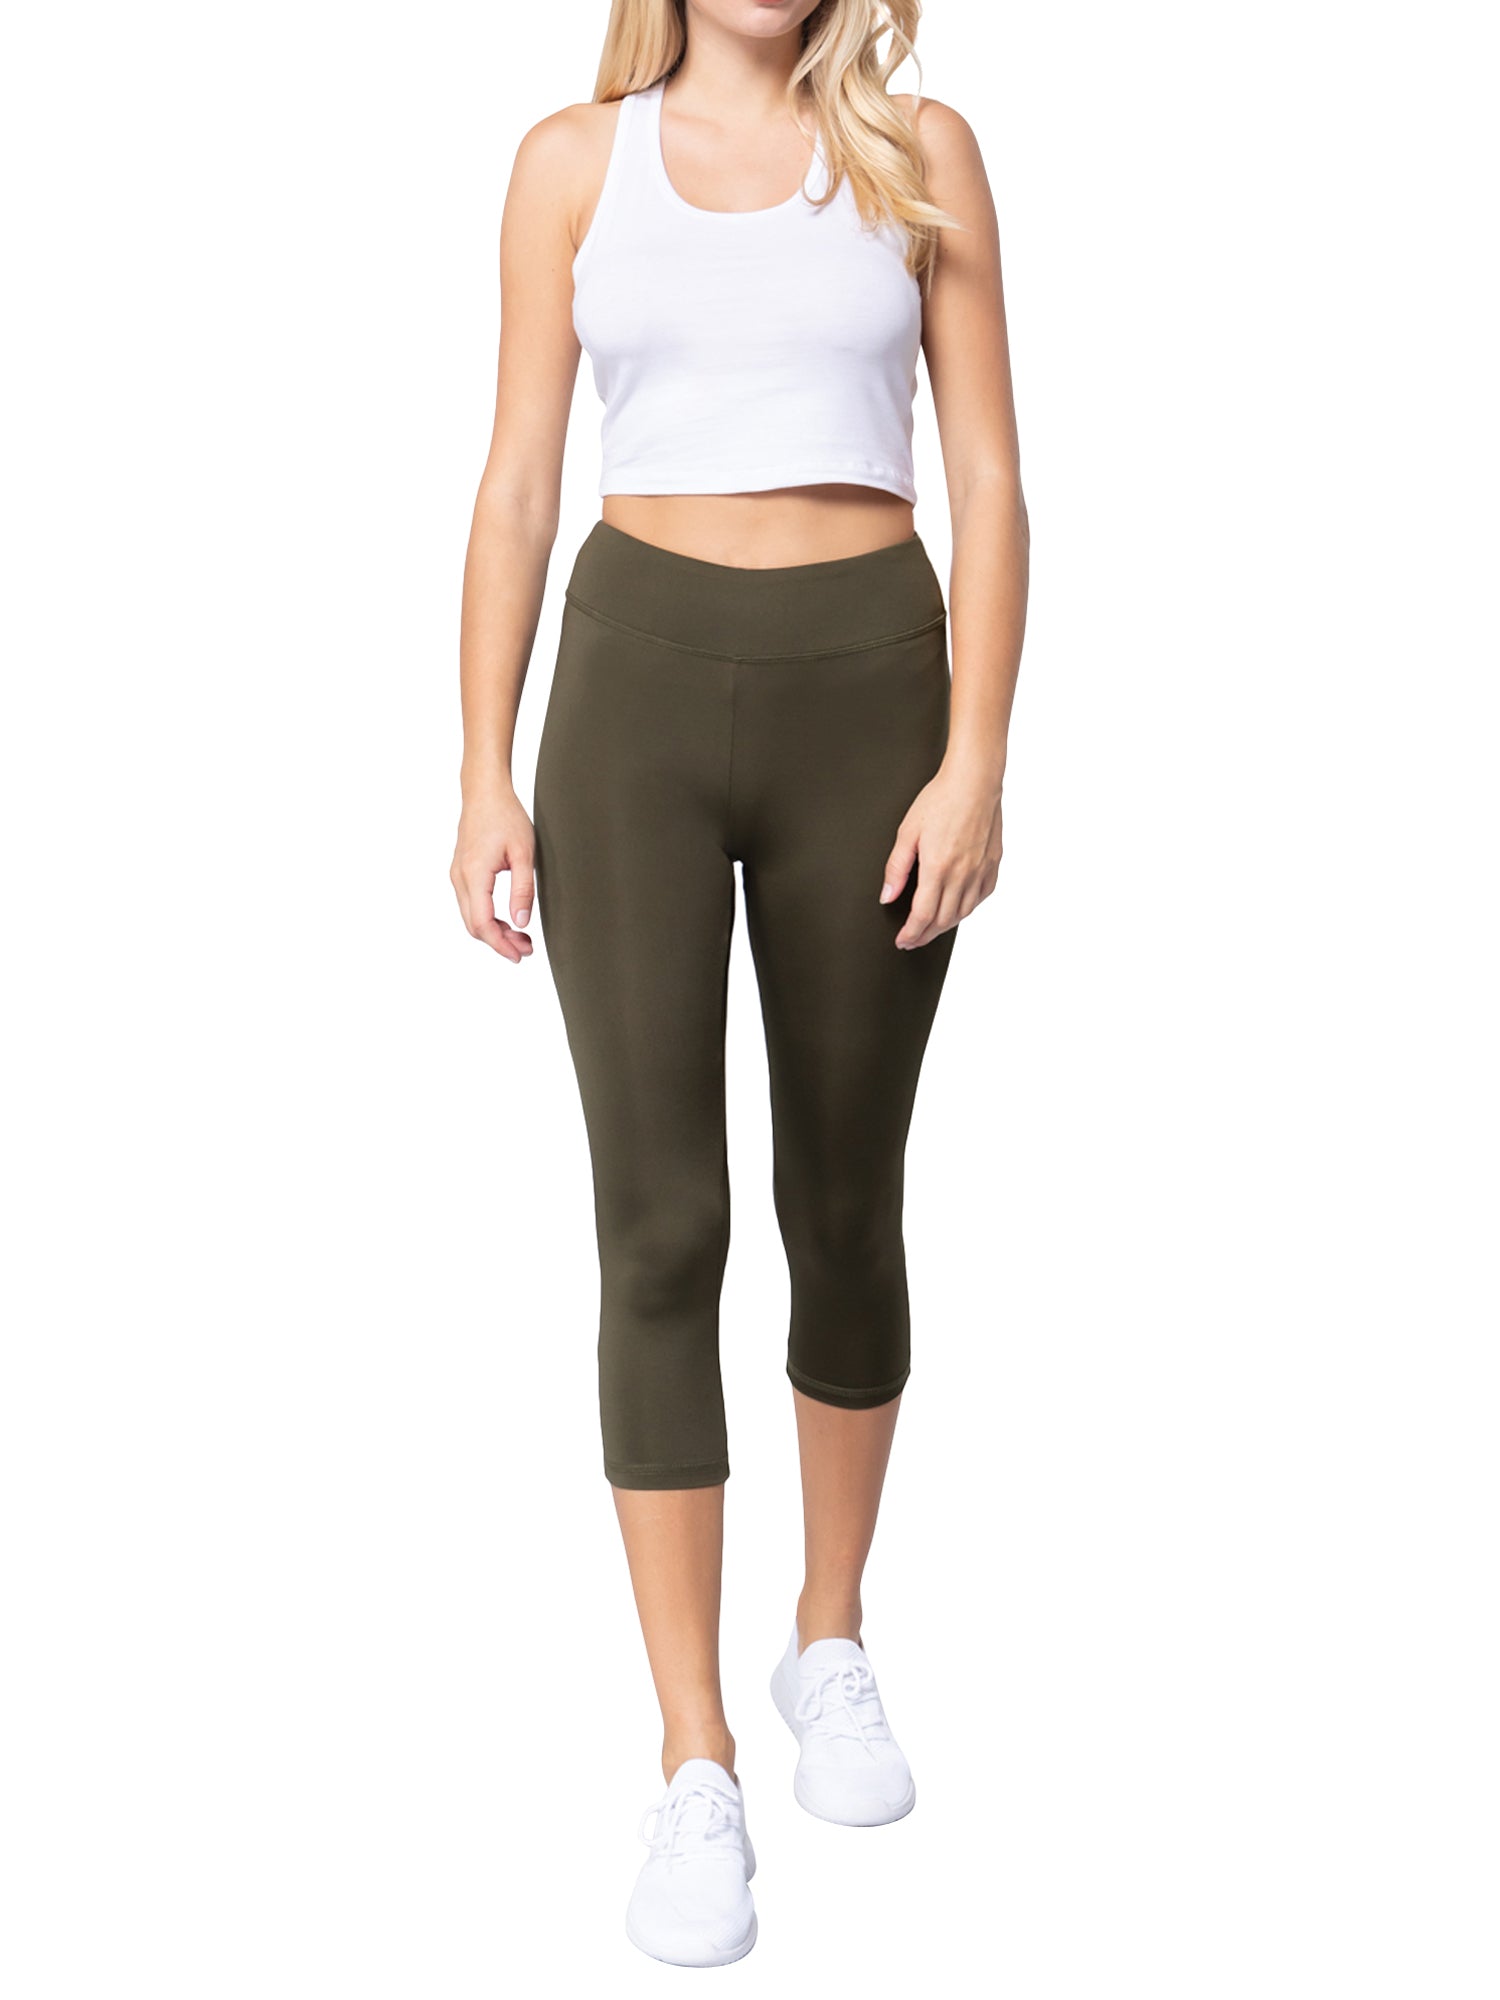 Juniors Active Stretch Capri Length Yoga Workout Leggings with Wide Wastband